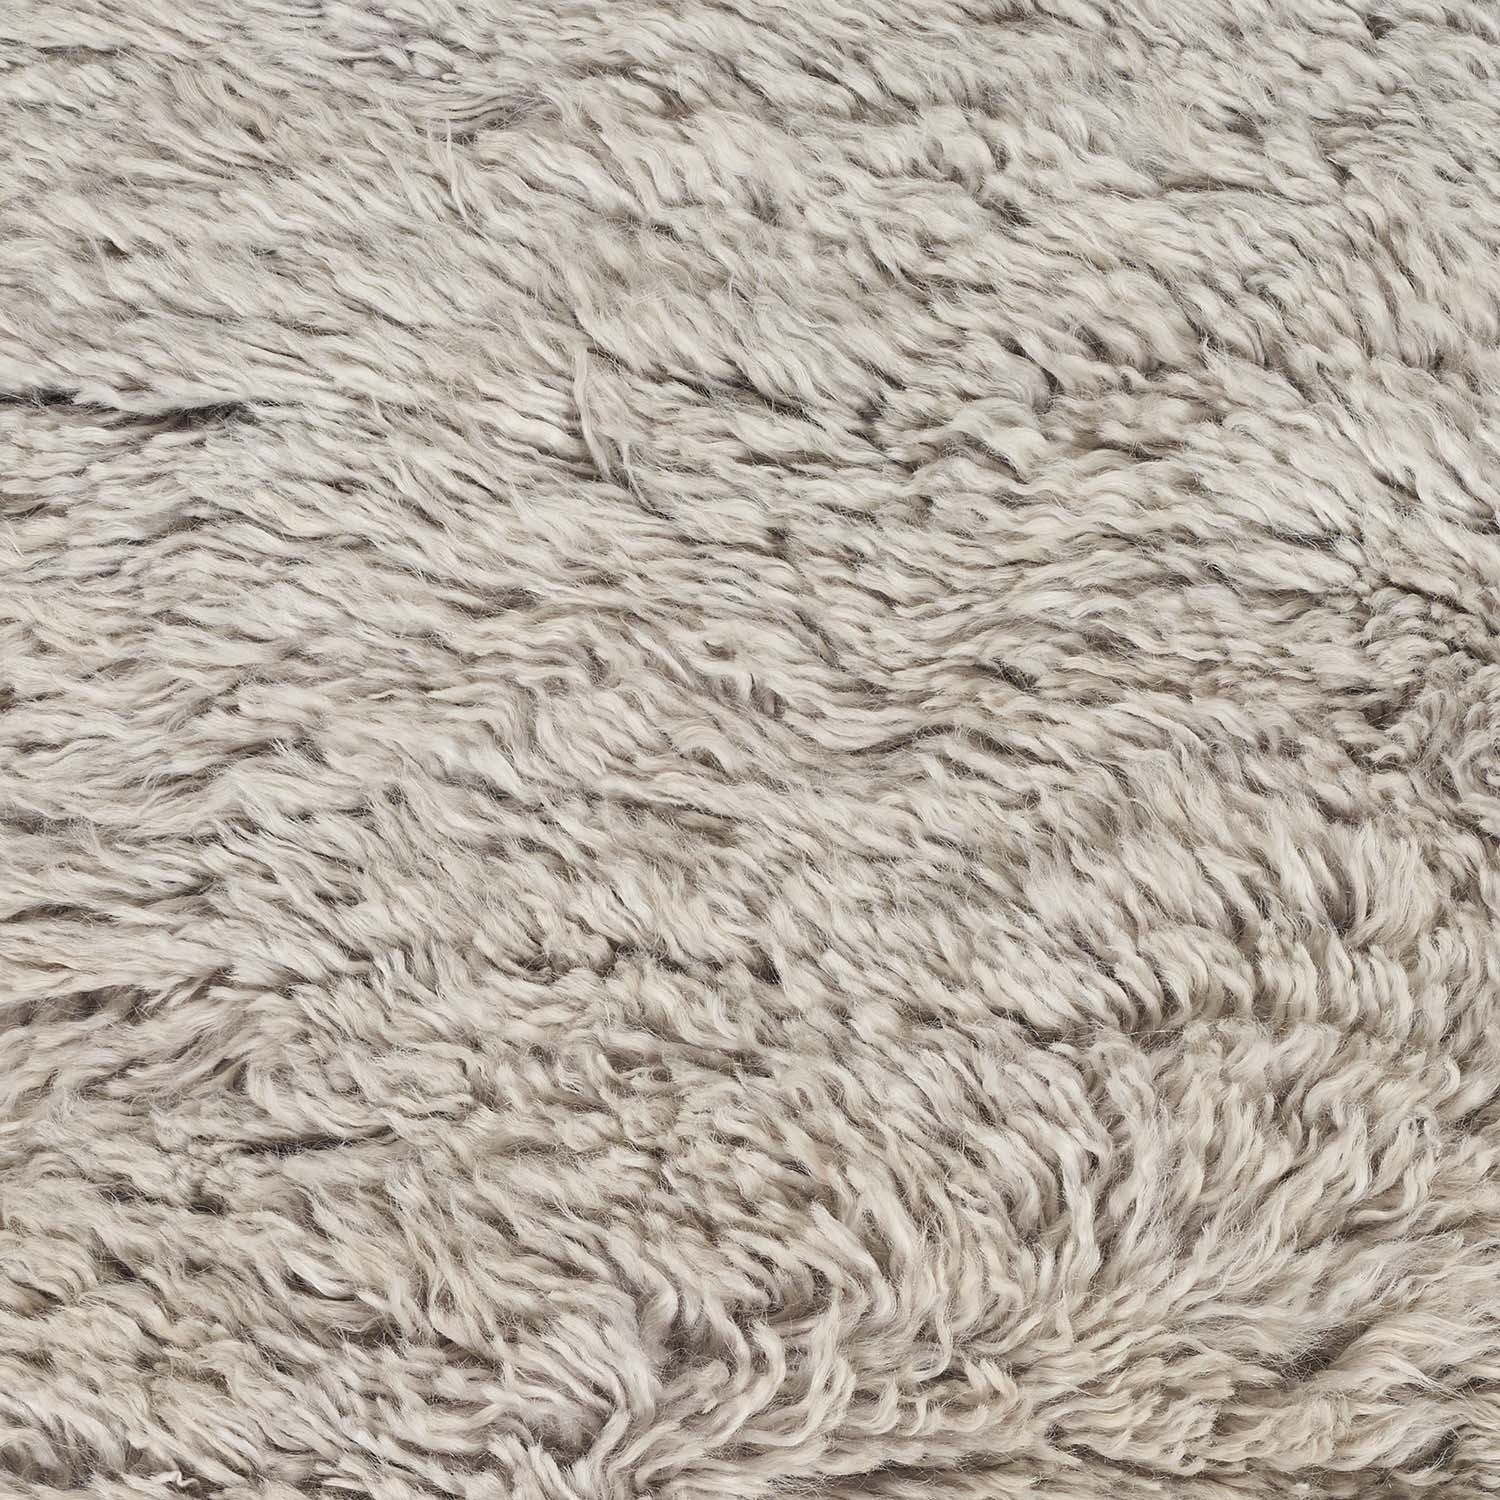 Close-up of a plush, shaggy fabric in neutral tones.